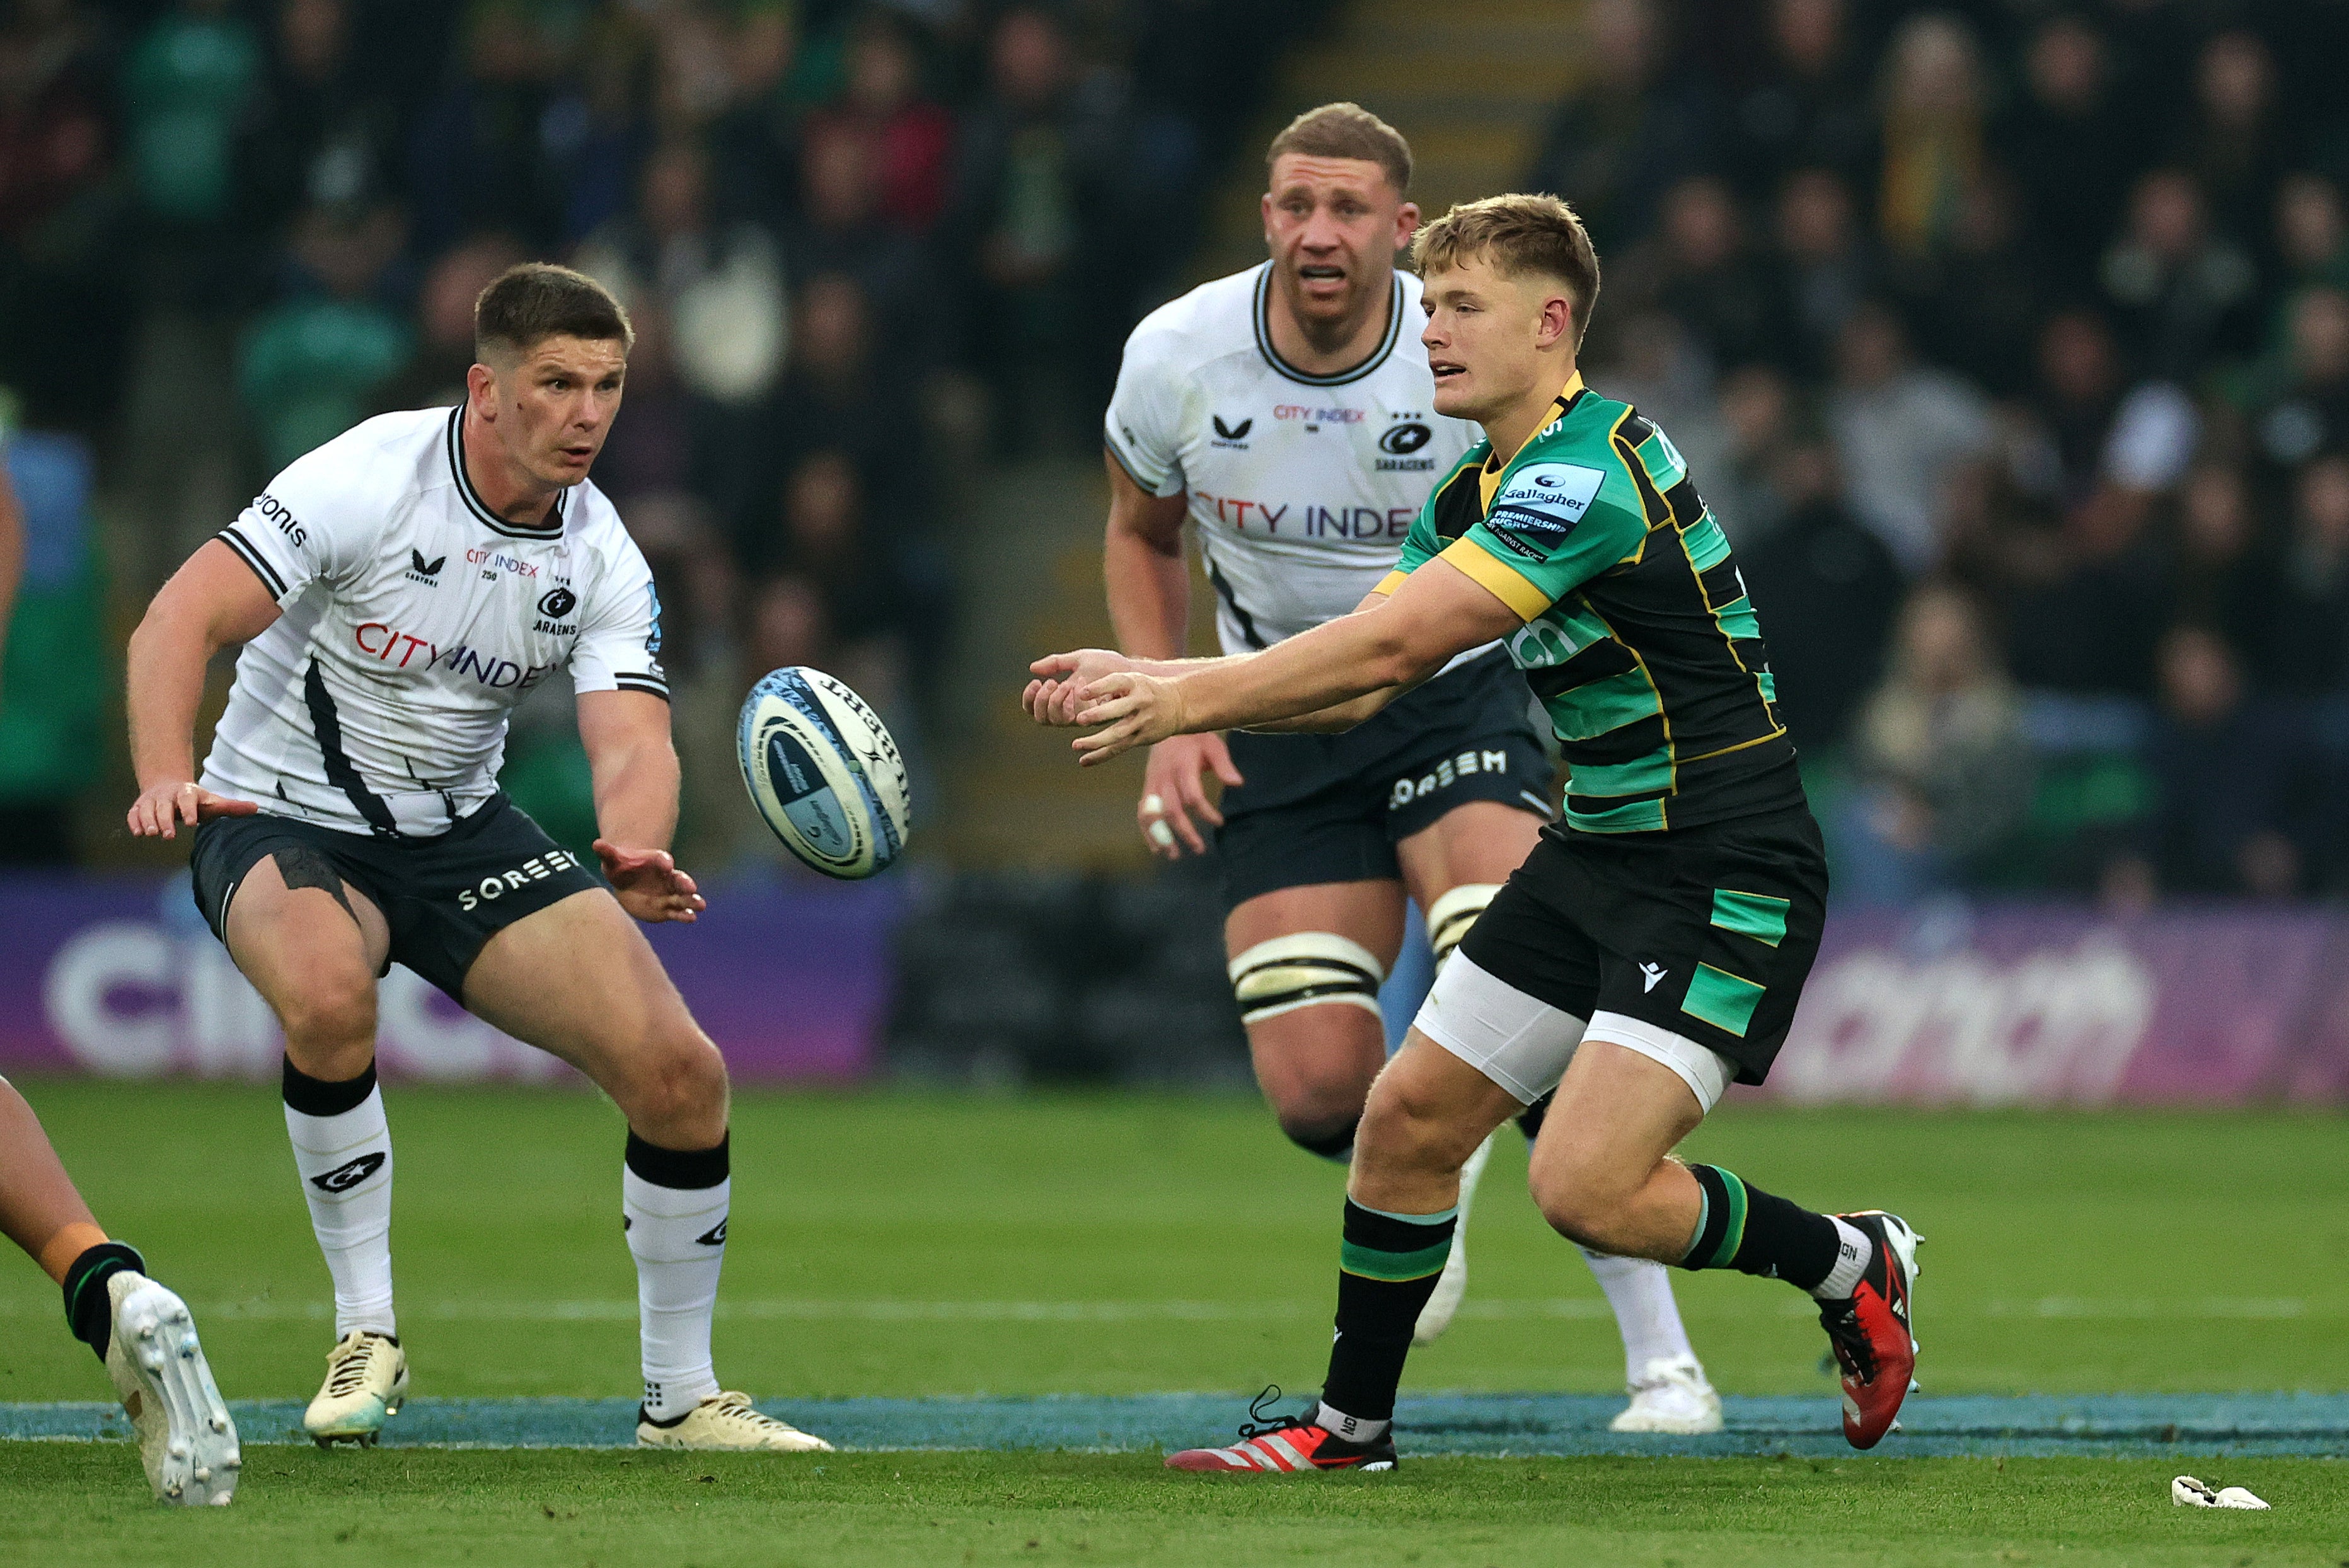 Fin Smith steered Northampton to victory